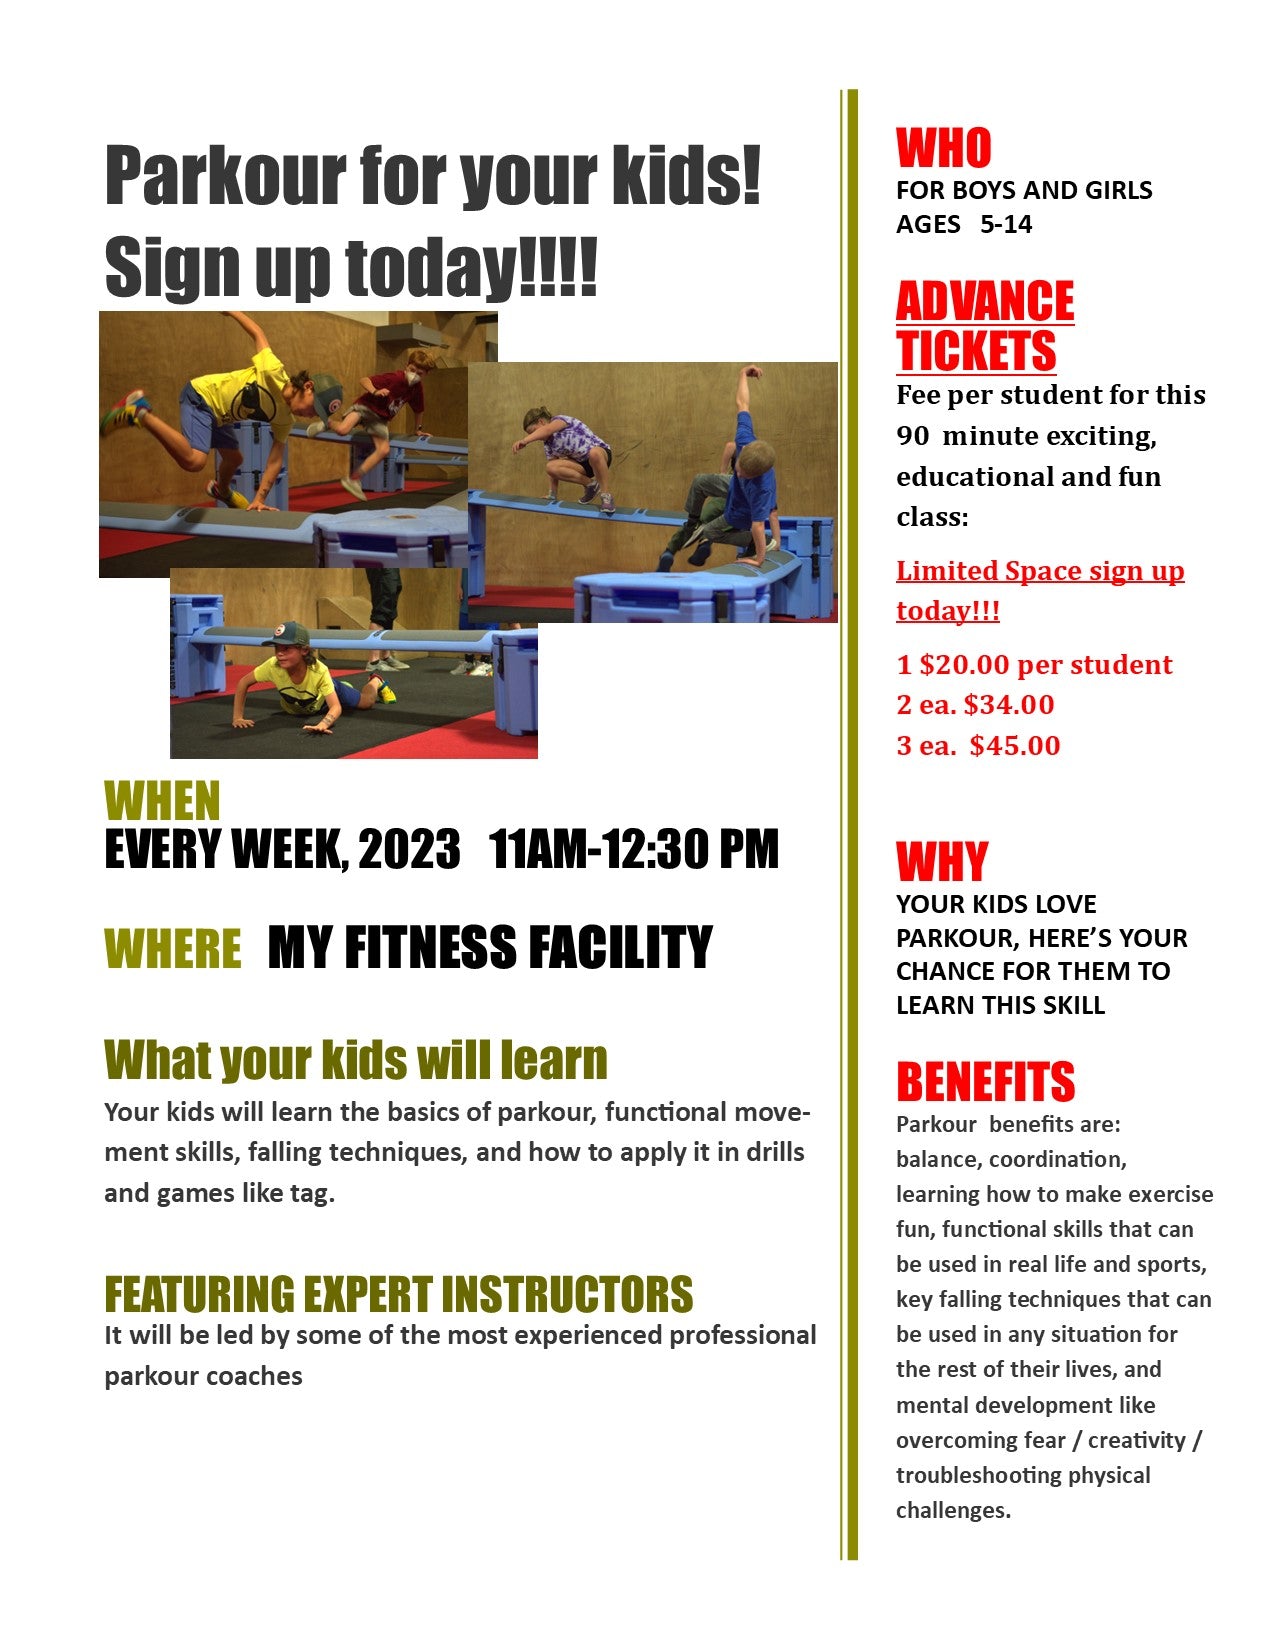 APEX Parkour For Kids Course and training package - Railyard Fitness Obstacle Course